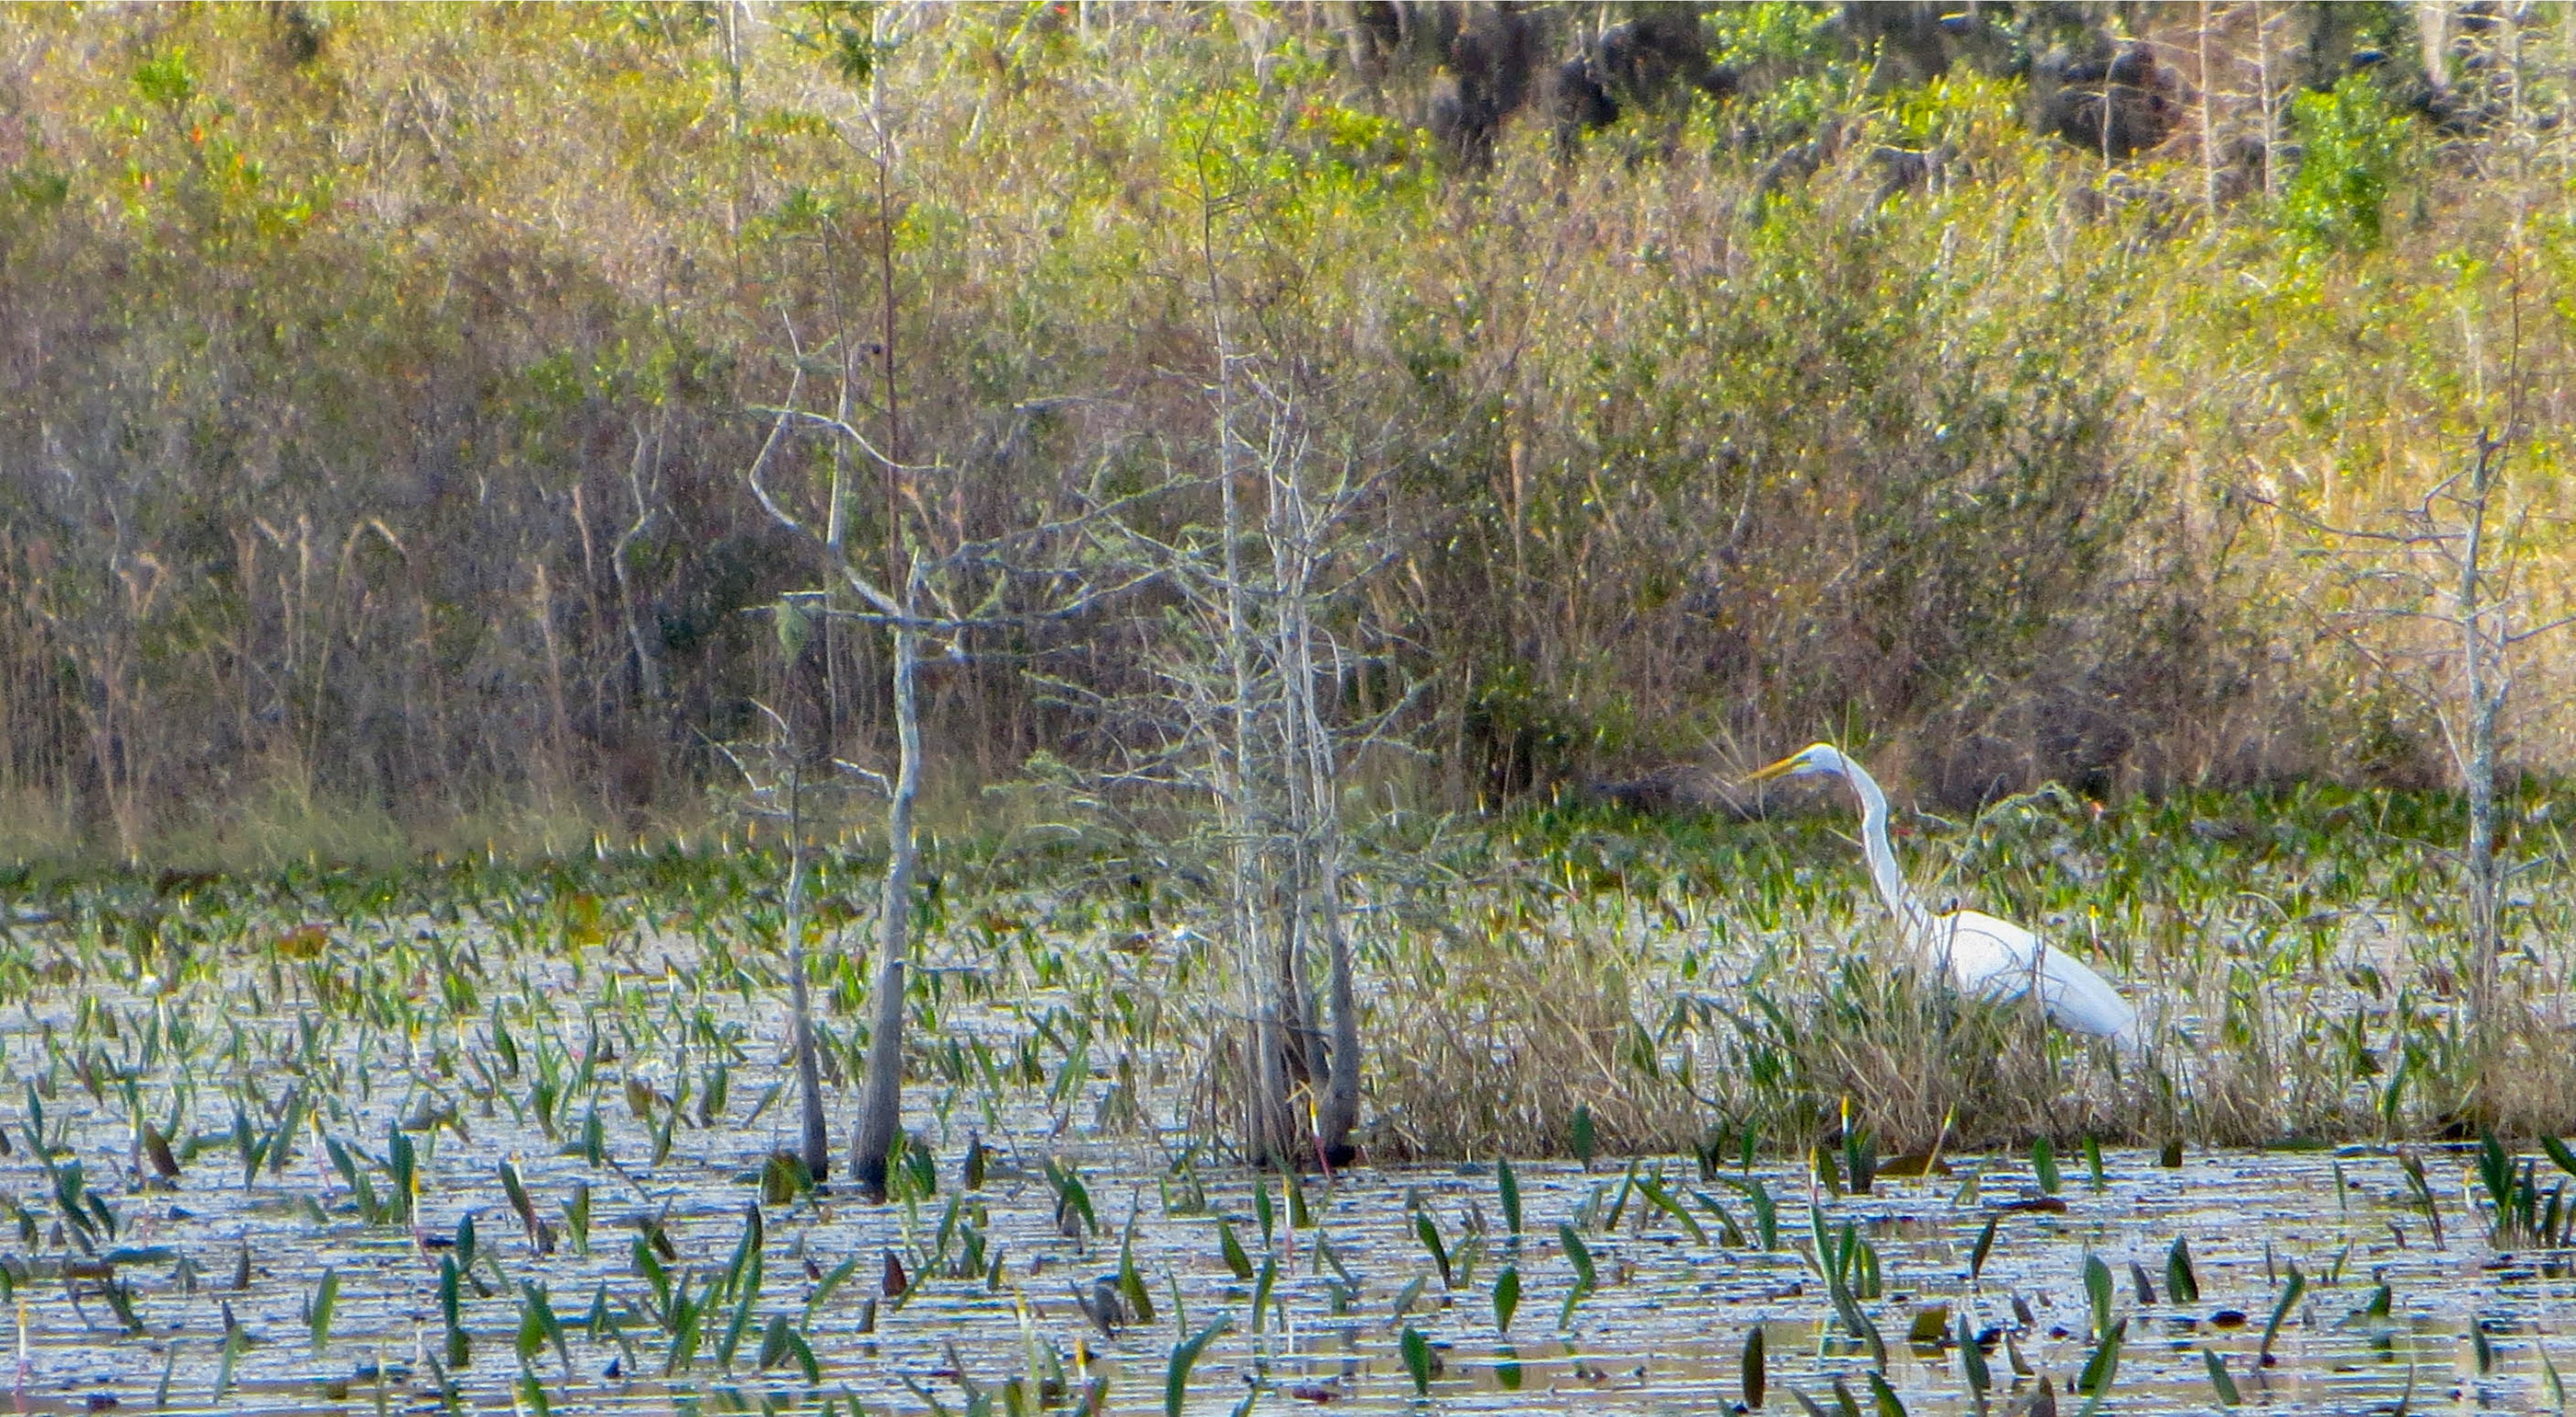 An egret walks through the shallow water of Okefenokee Swamp.